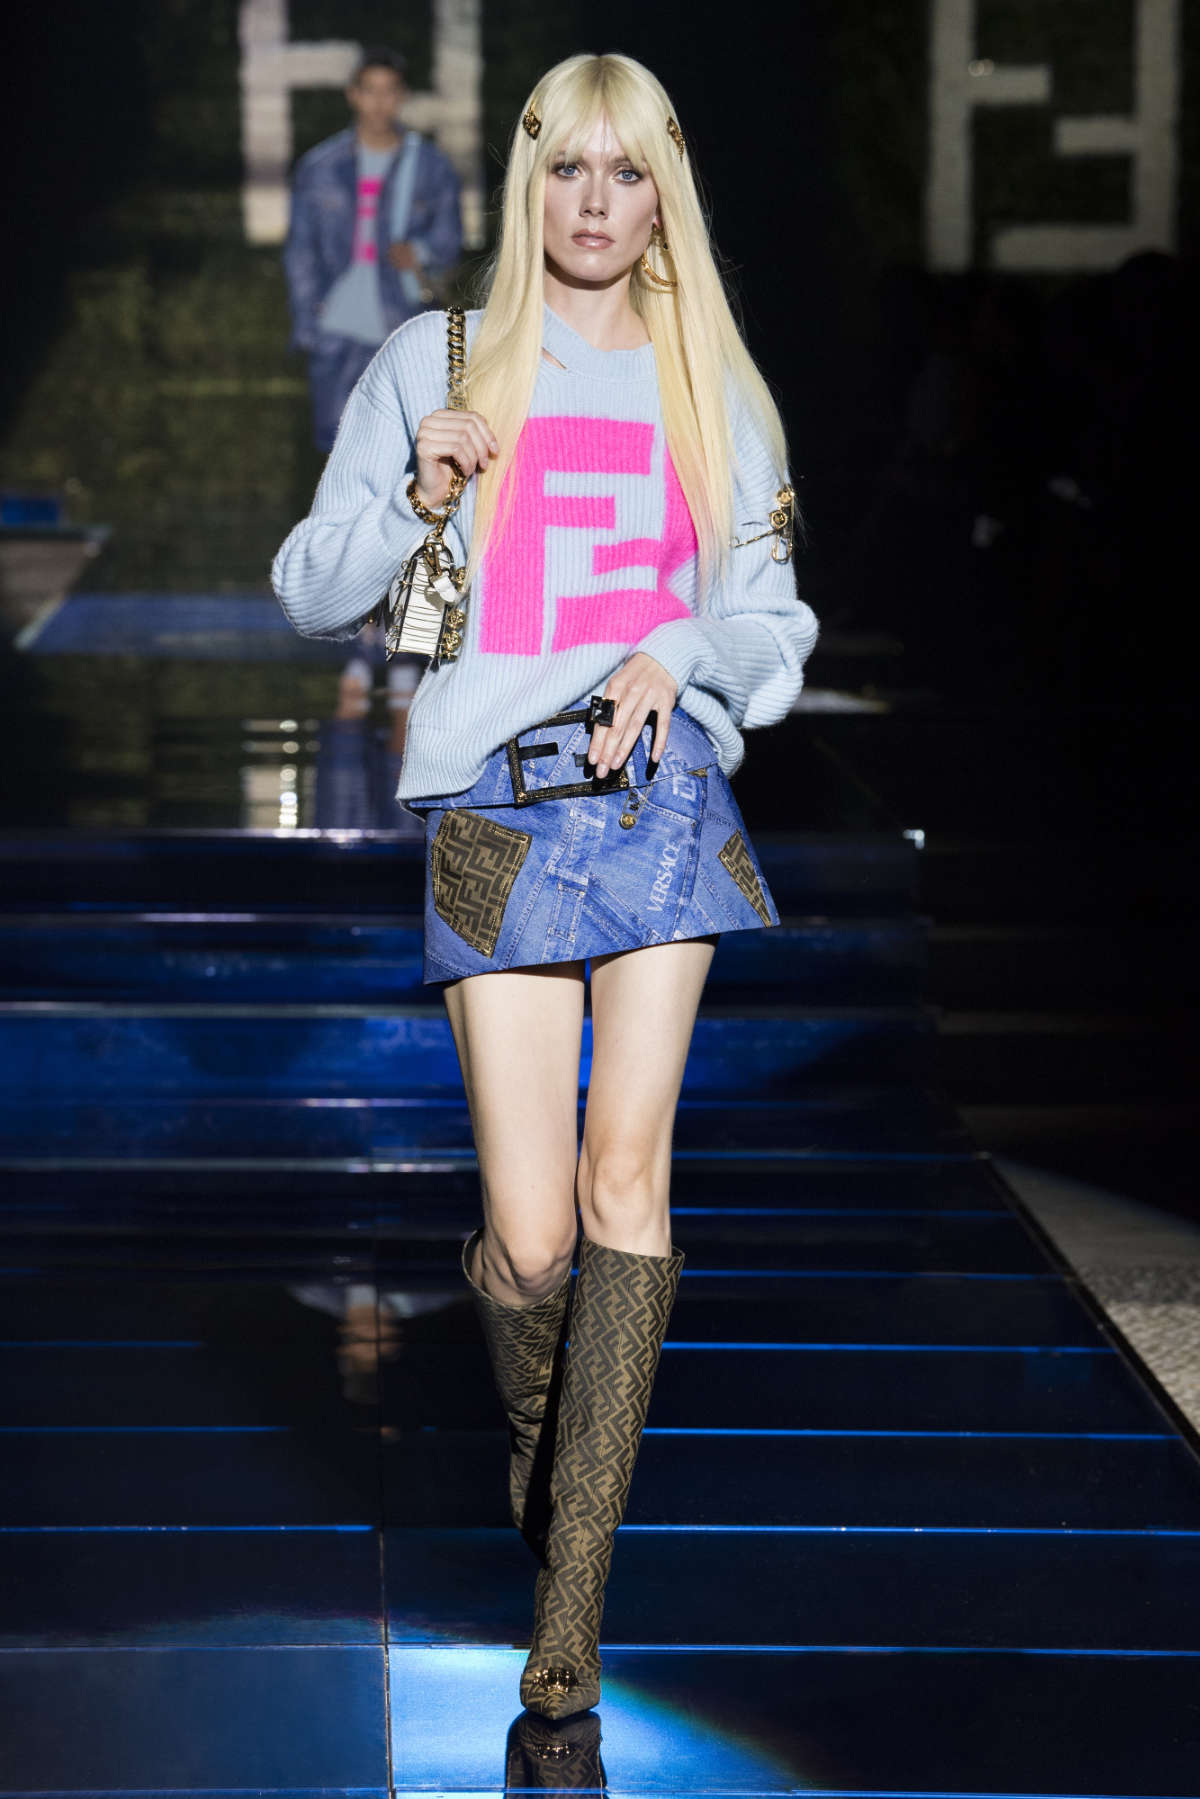 Versace By Fendi – Fendi By Versace: Collection Launch